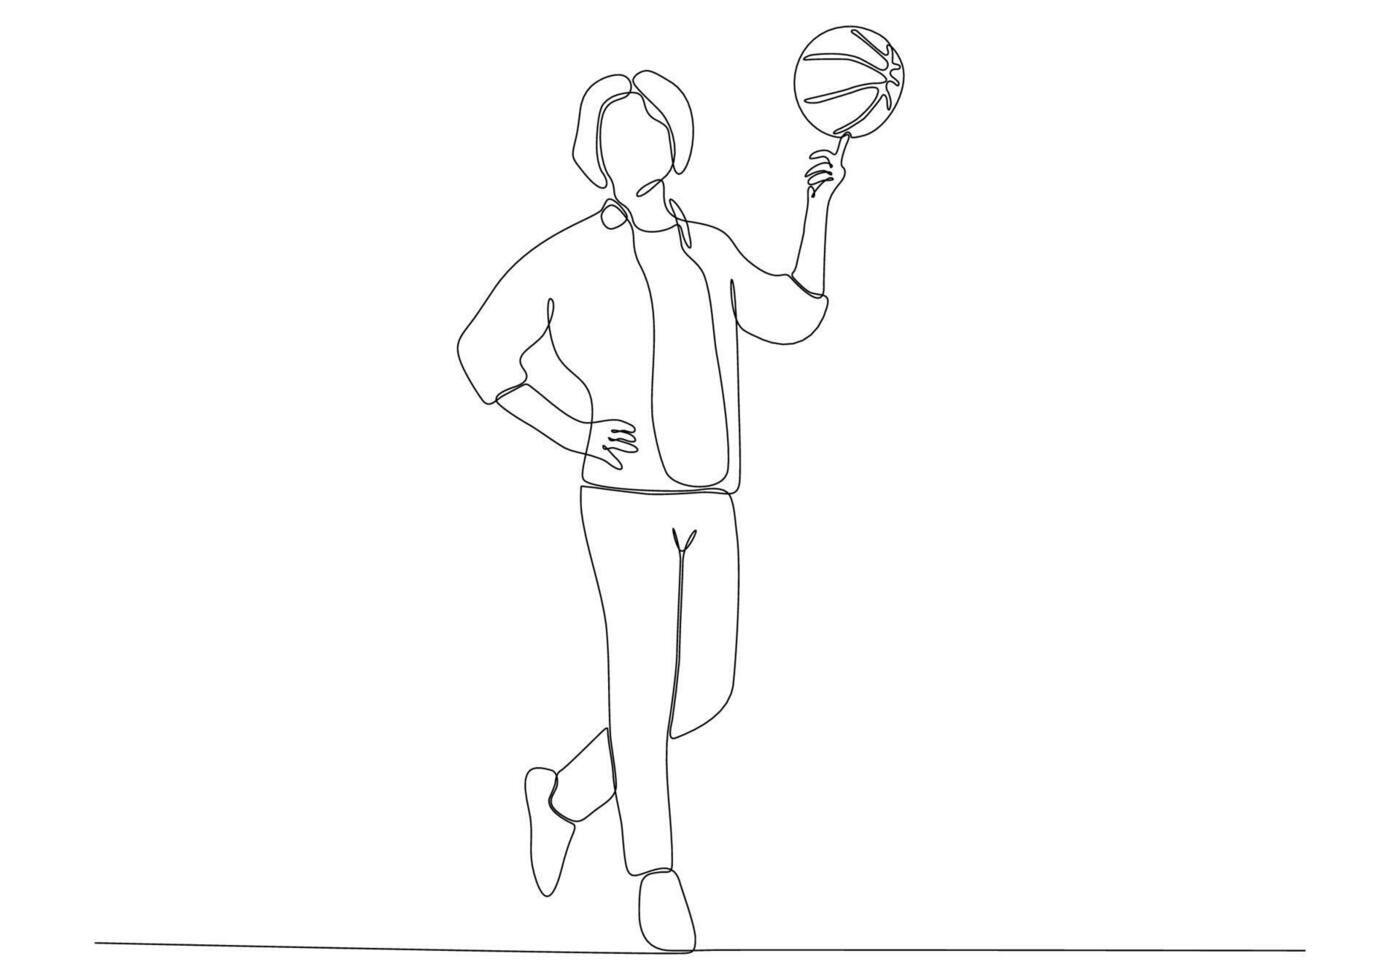 Continuous line art of man playing basketball vector